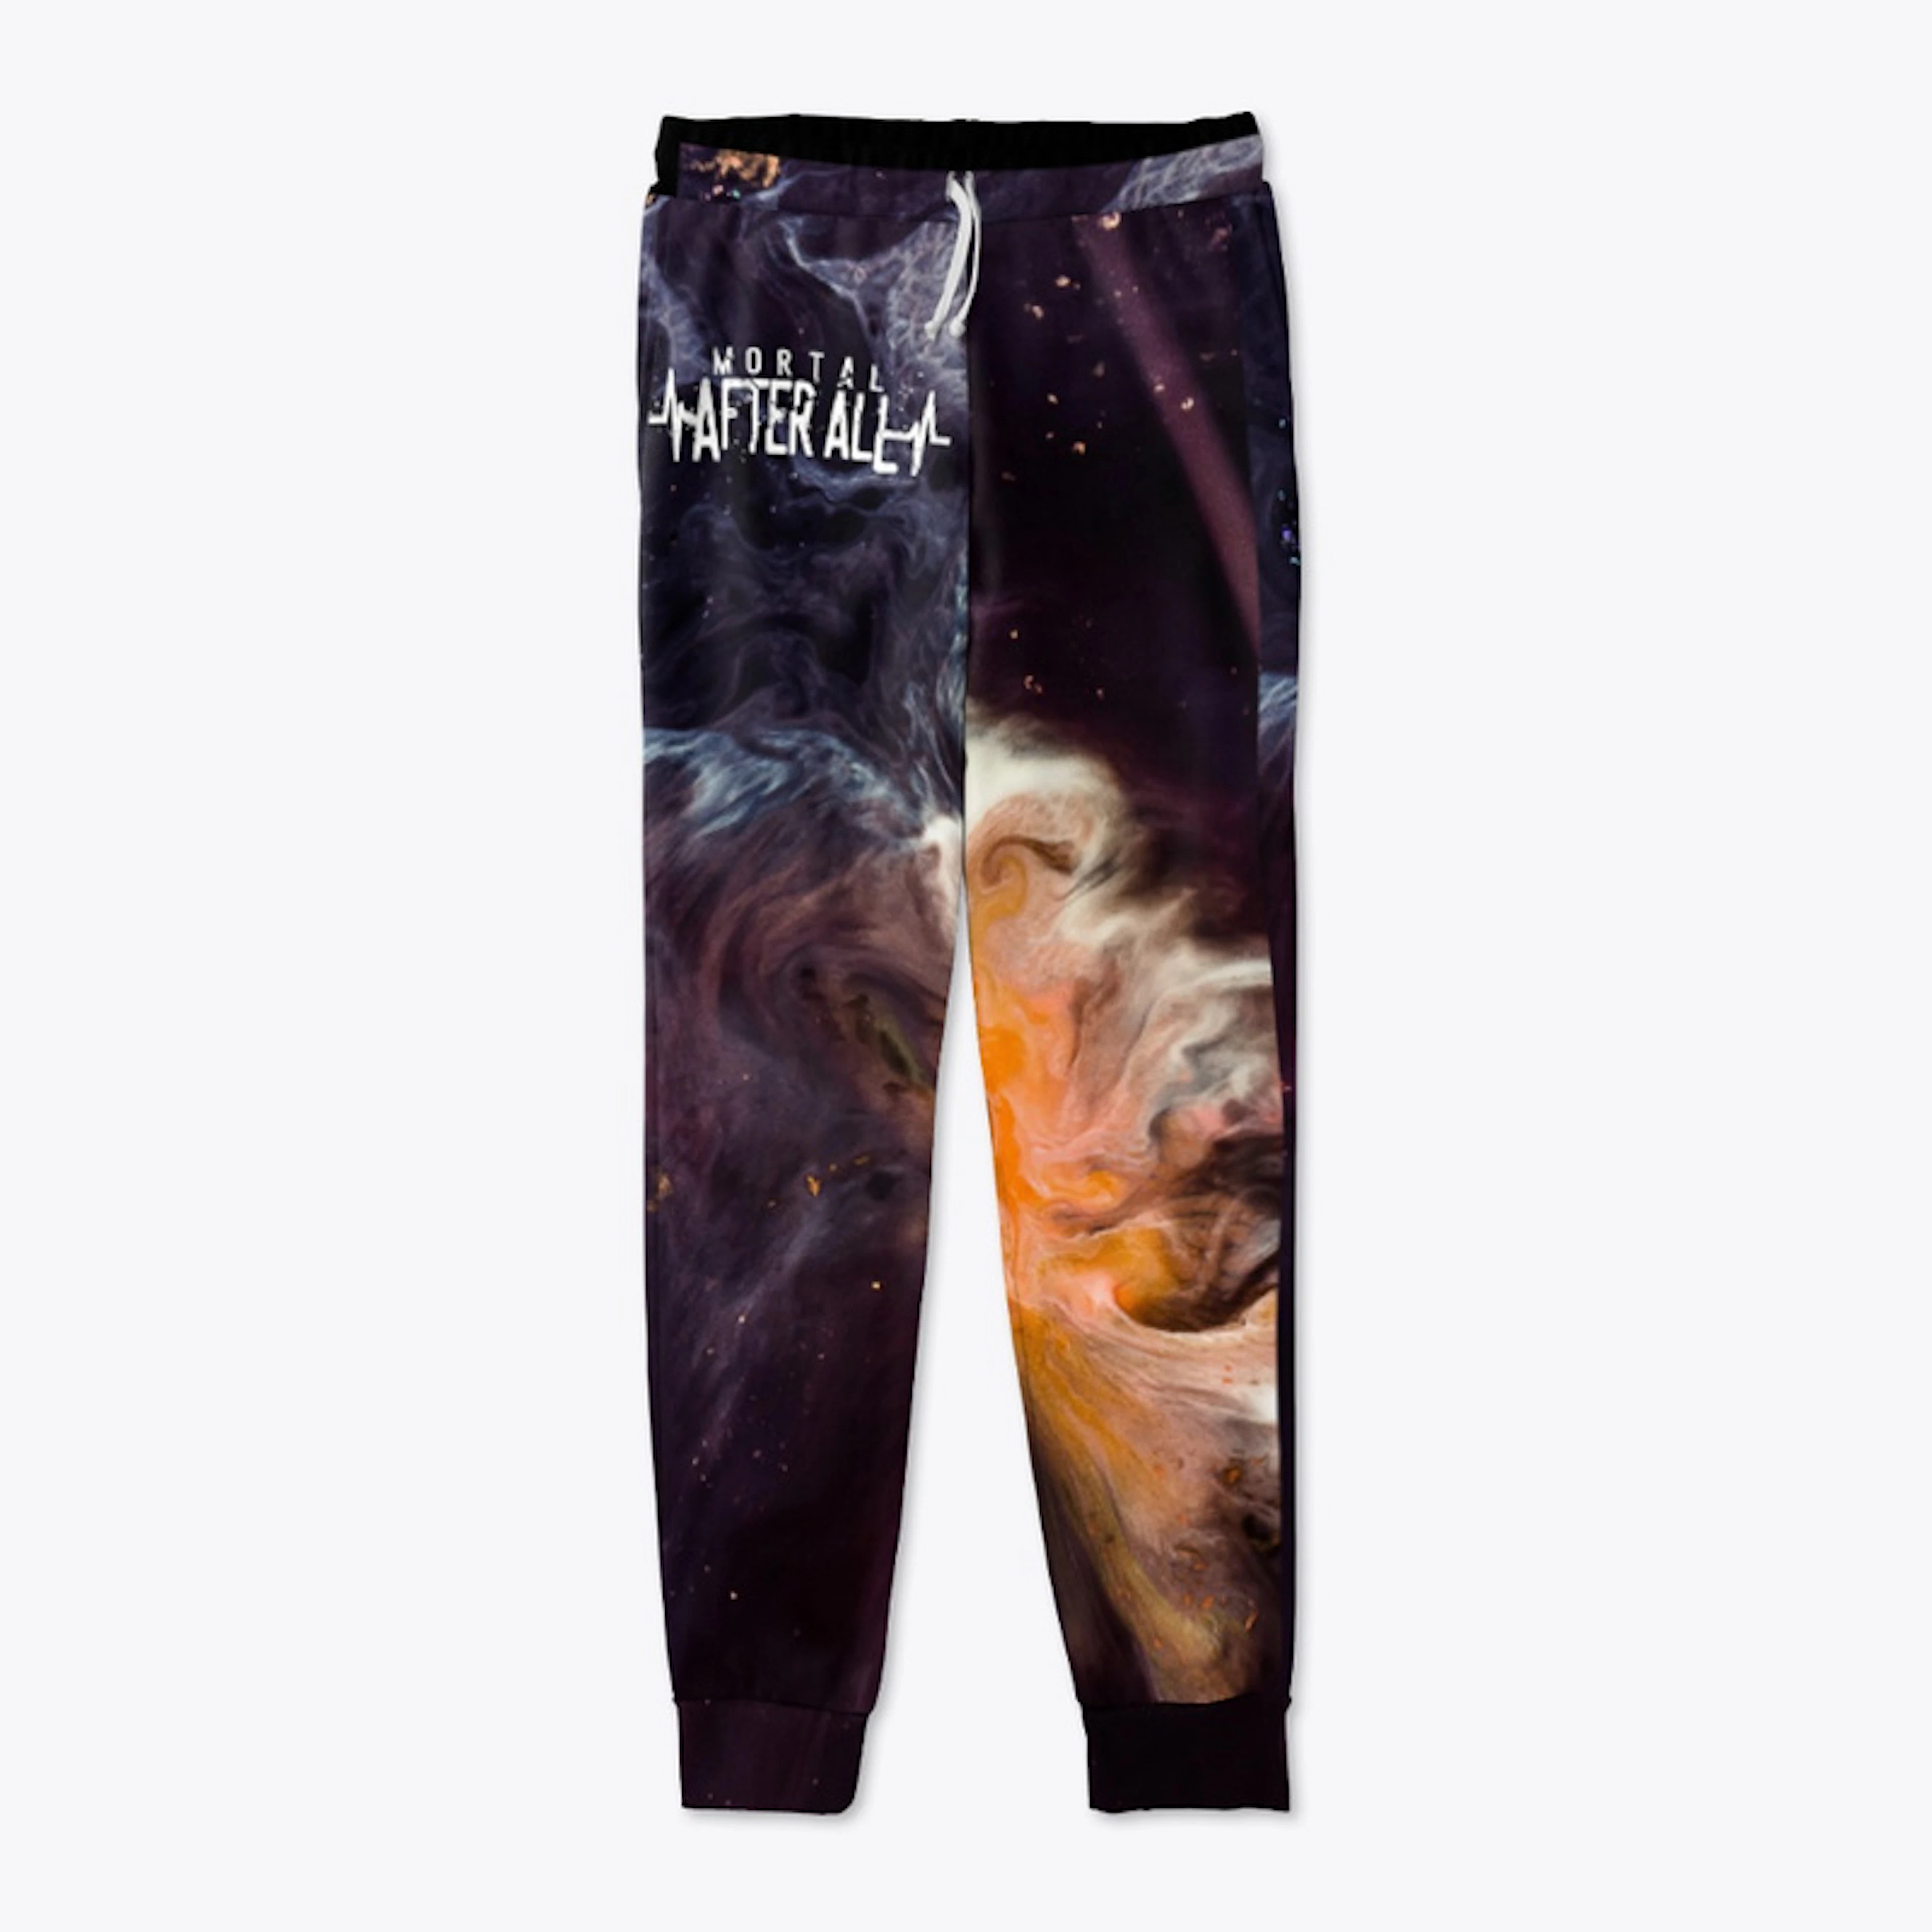 Space Joggers